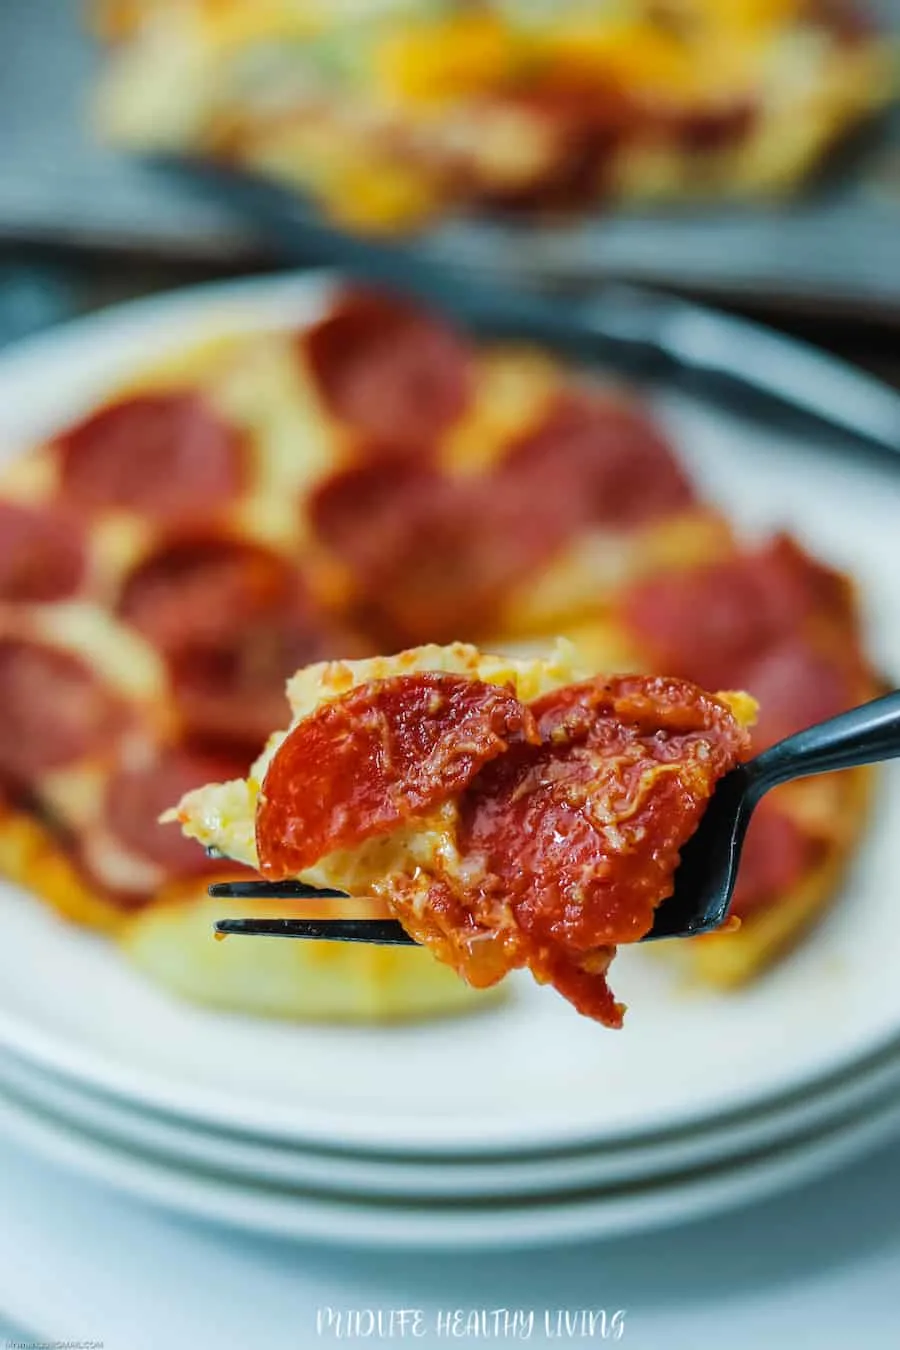 Here we see a bite of ww pizza recipe on a fork ready to be devoured. 